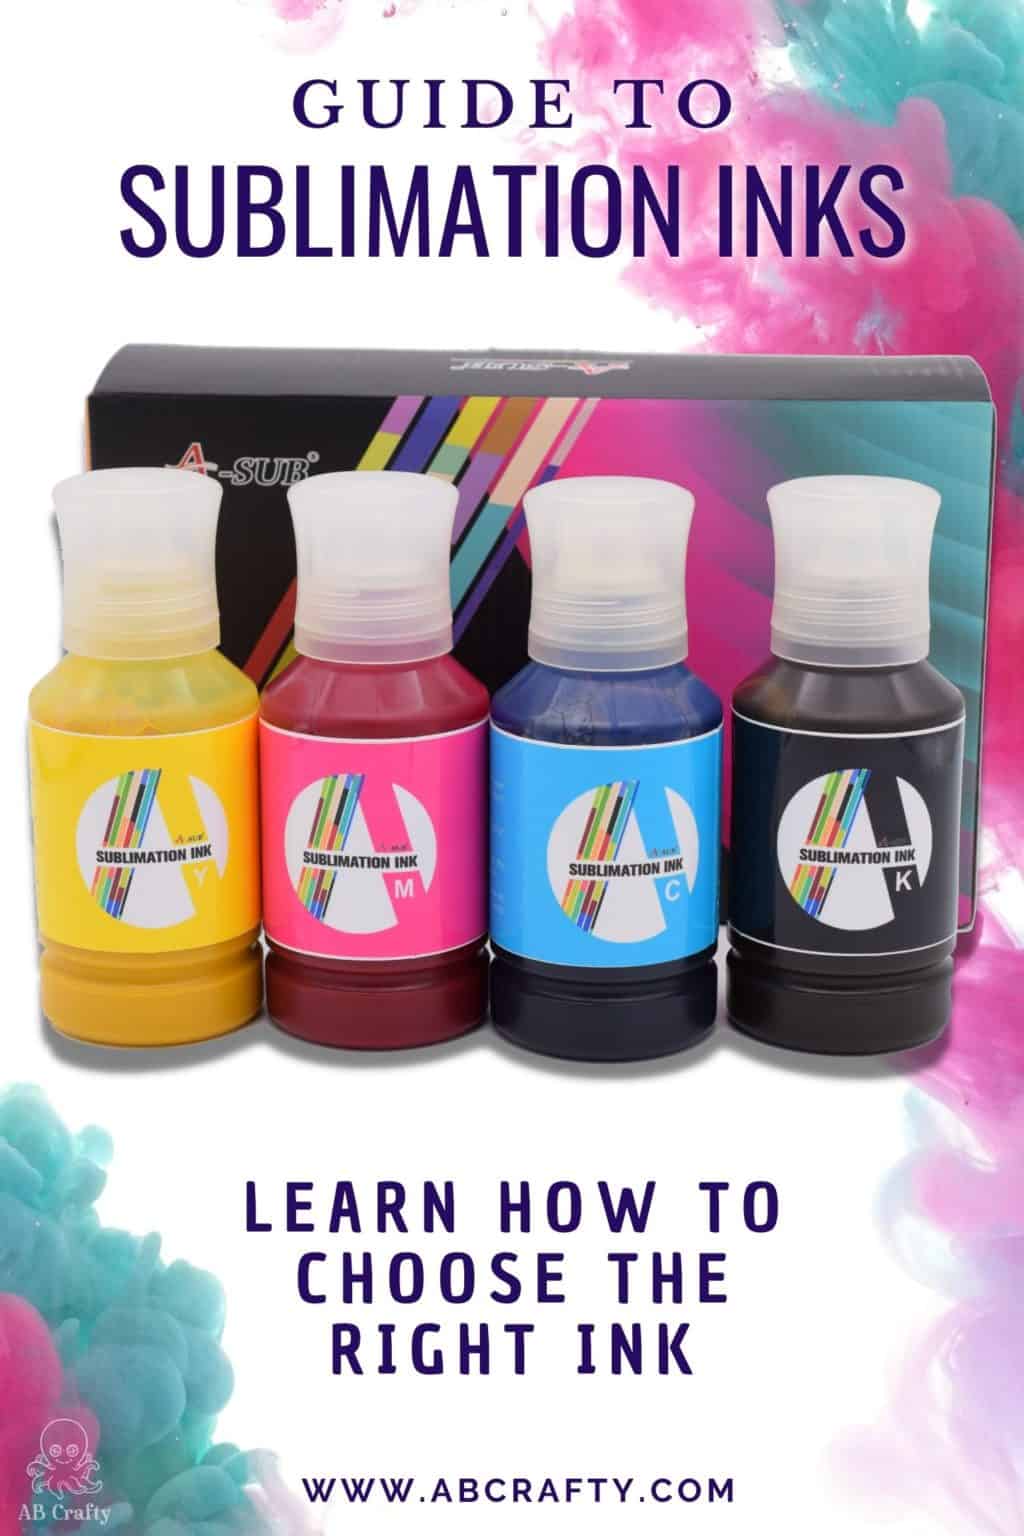 a-sub autofill sublimation ink in the background with the title "guide to sublimation inks - learn how to choose the right ink"